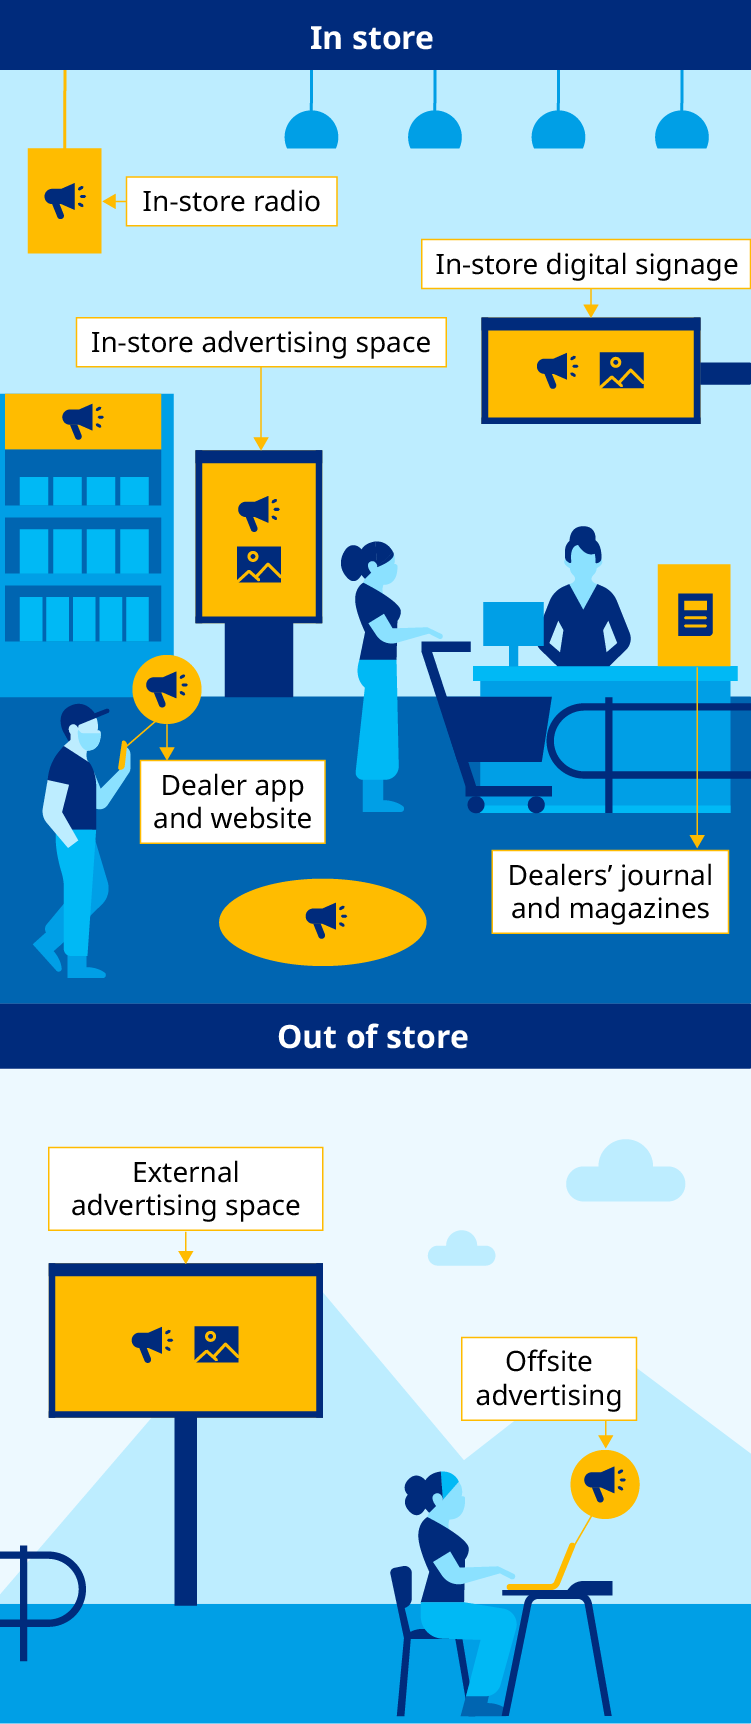 Infographic comparing in store and out of store technologies